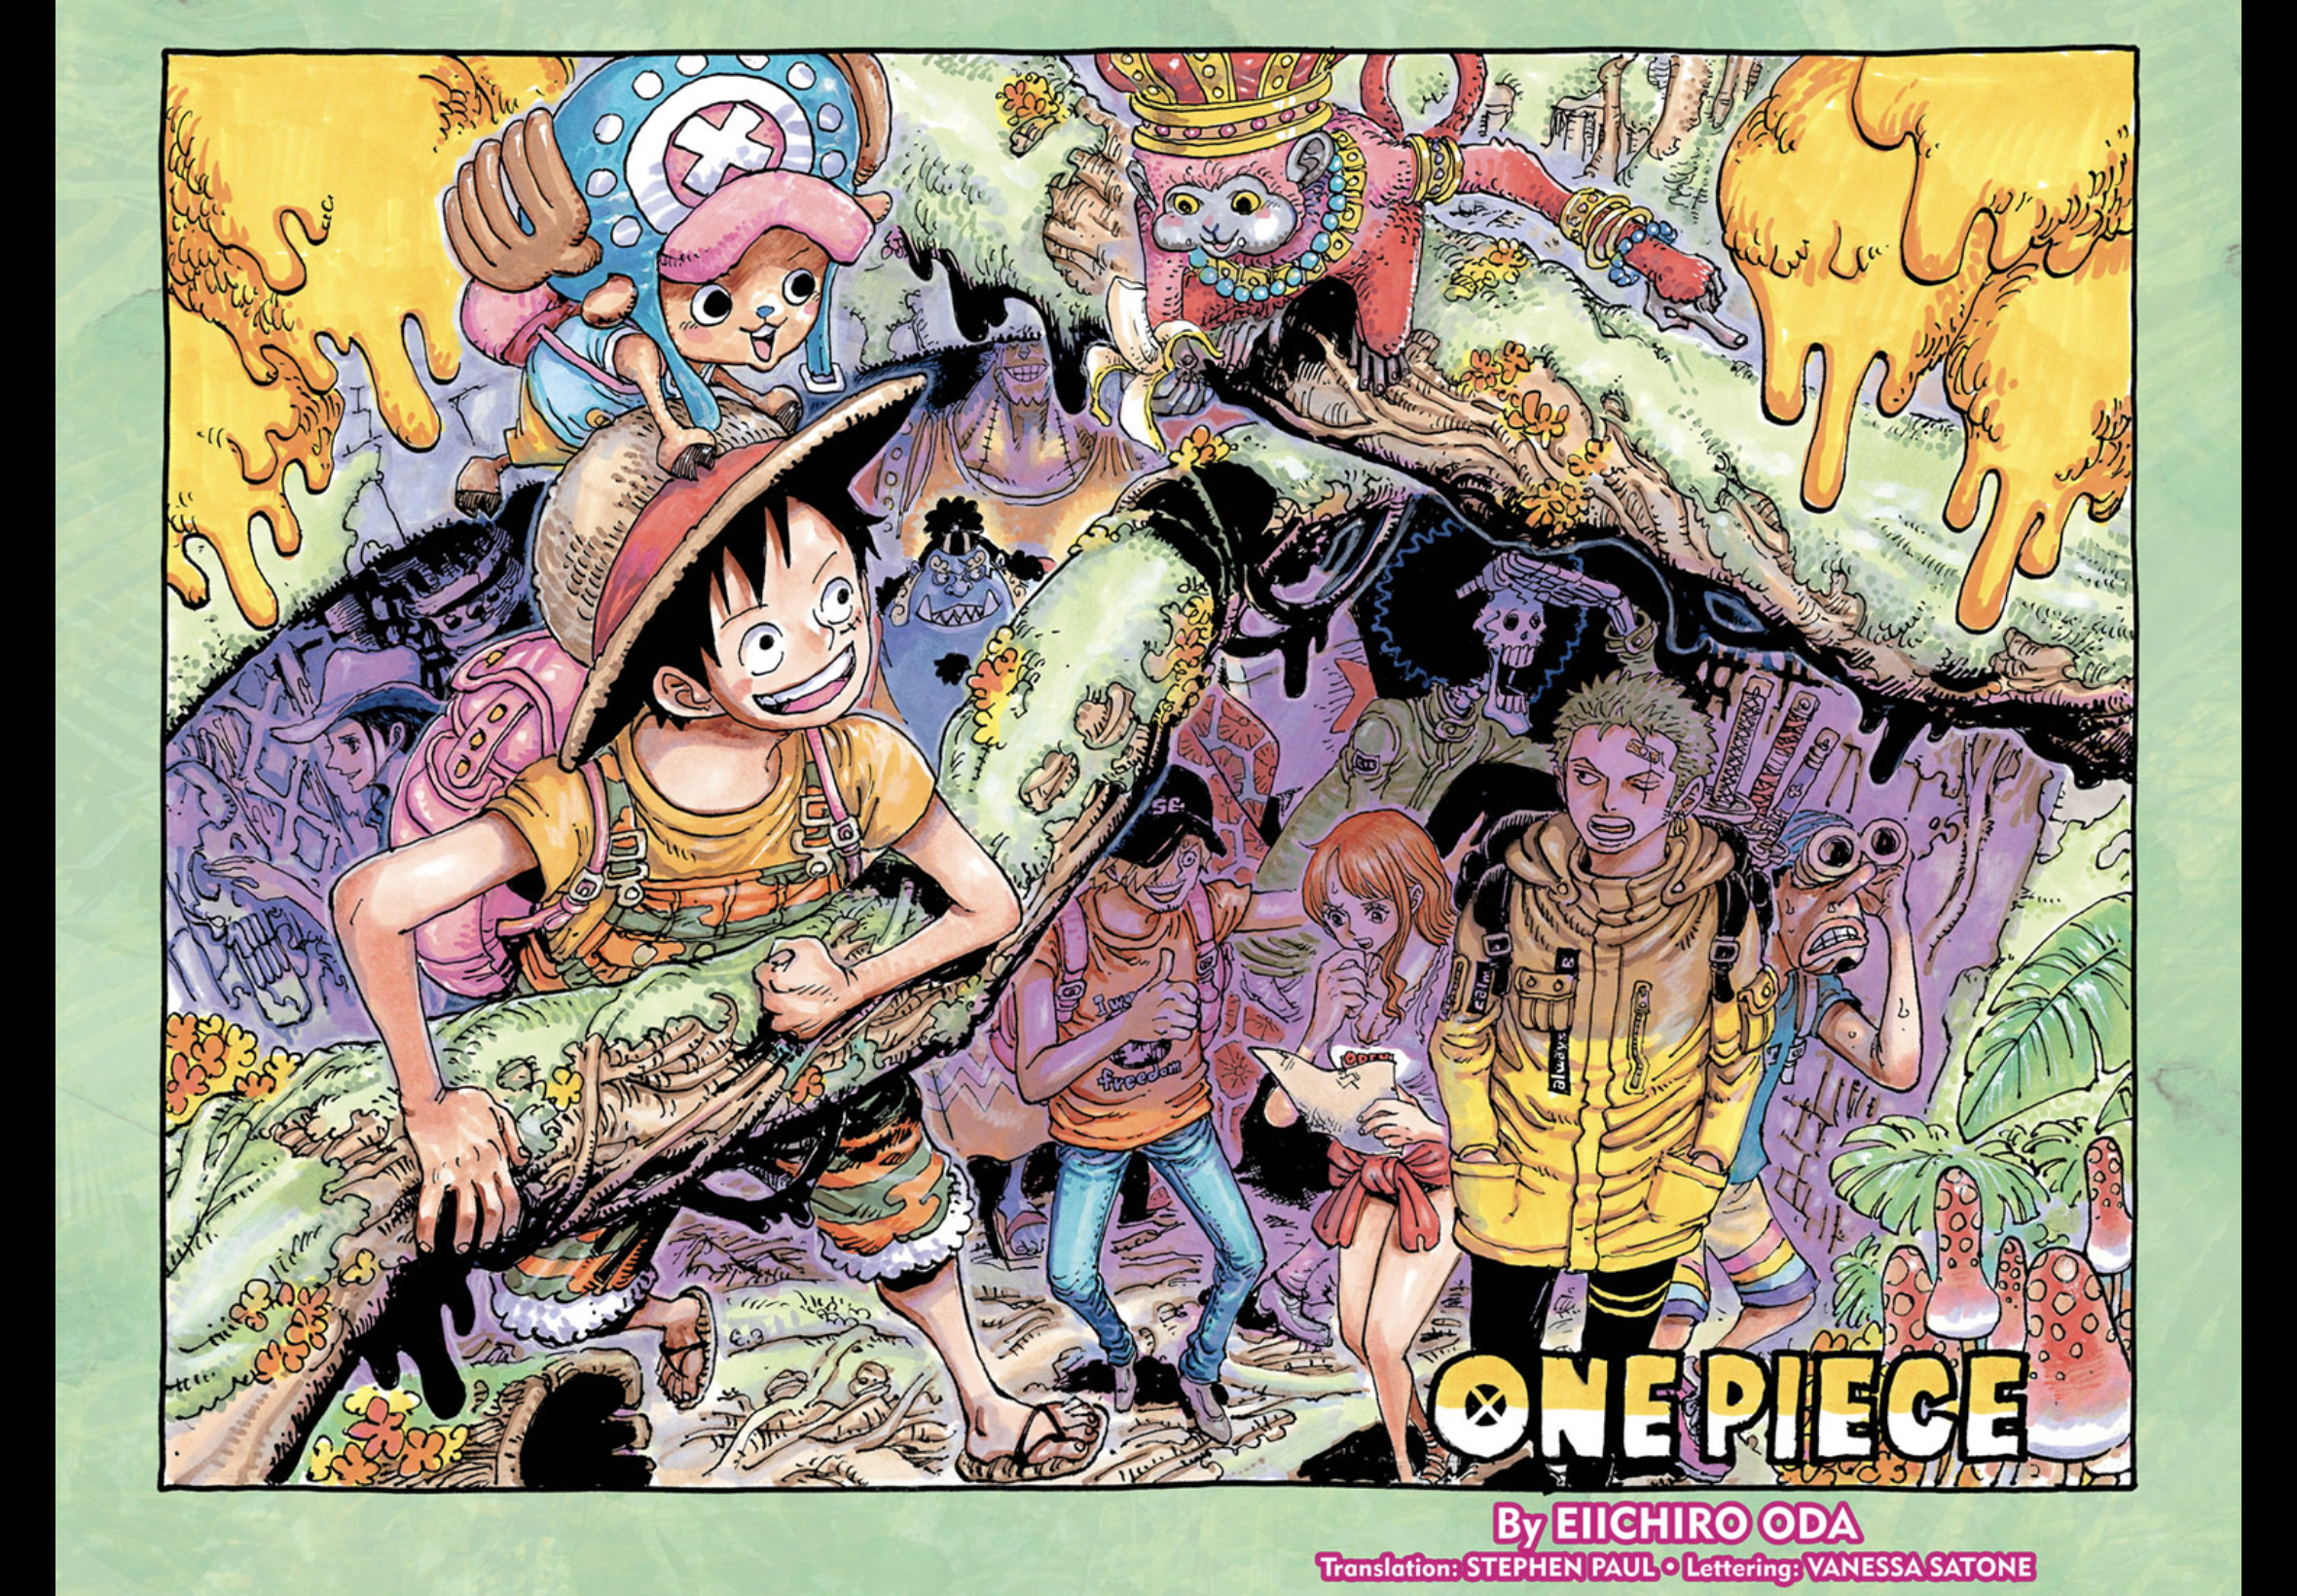 A crazy, detailed, psychedelic illustration from One Piece